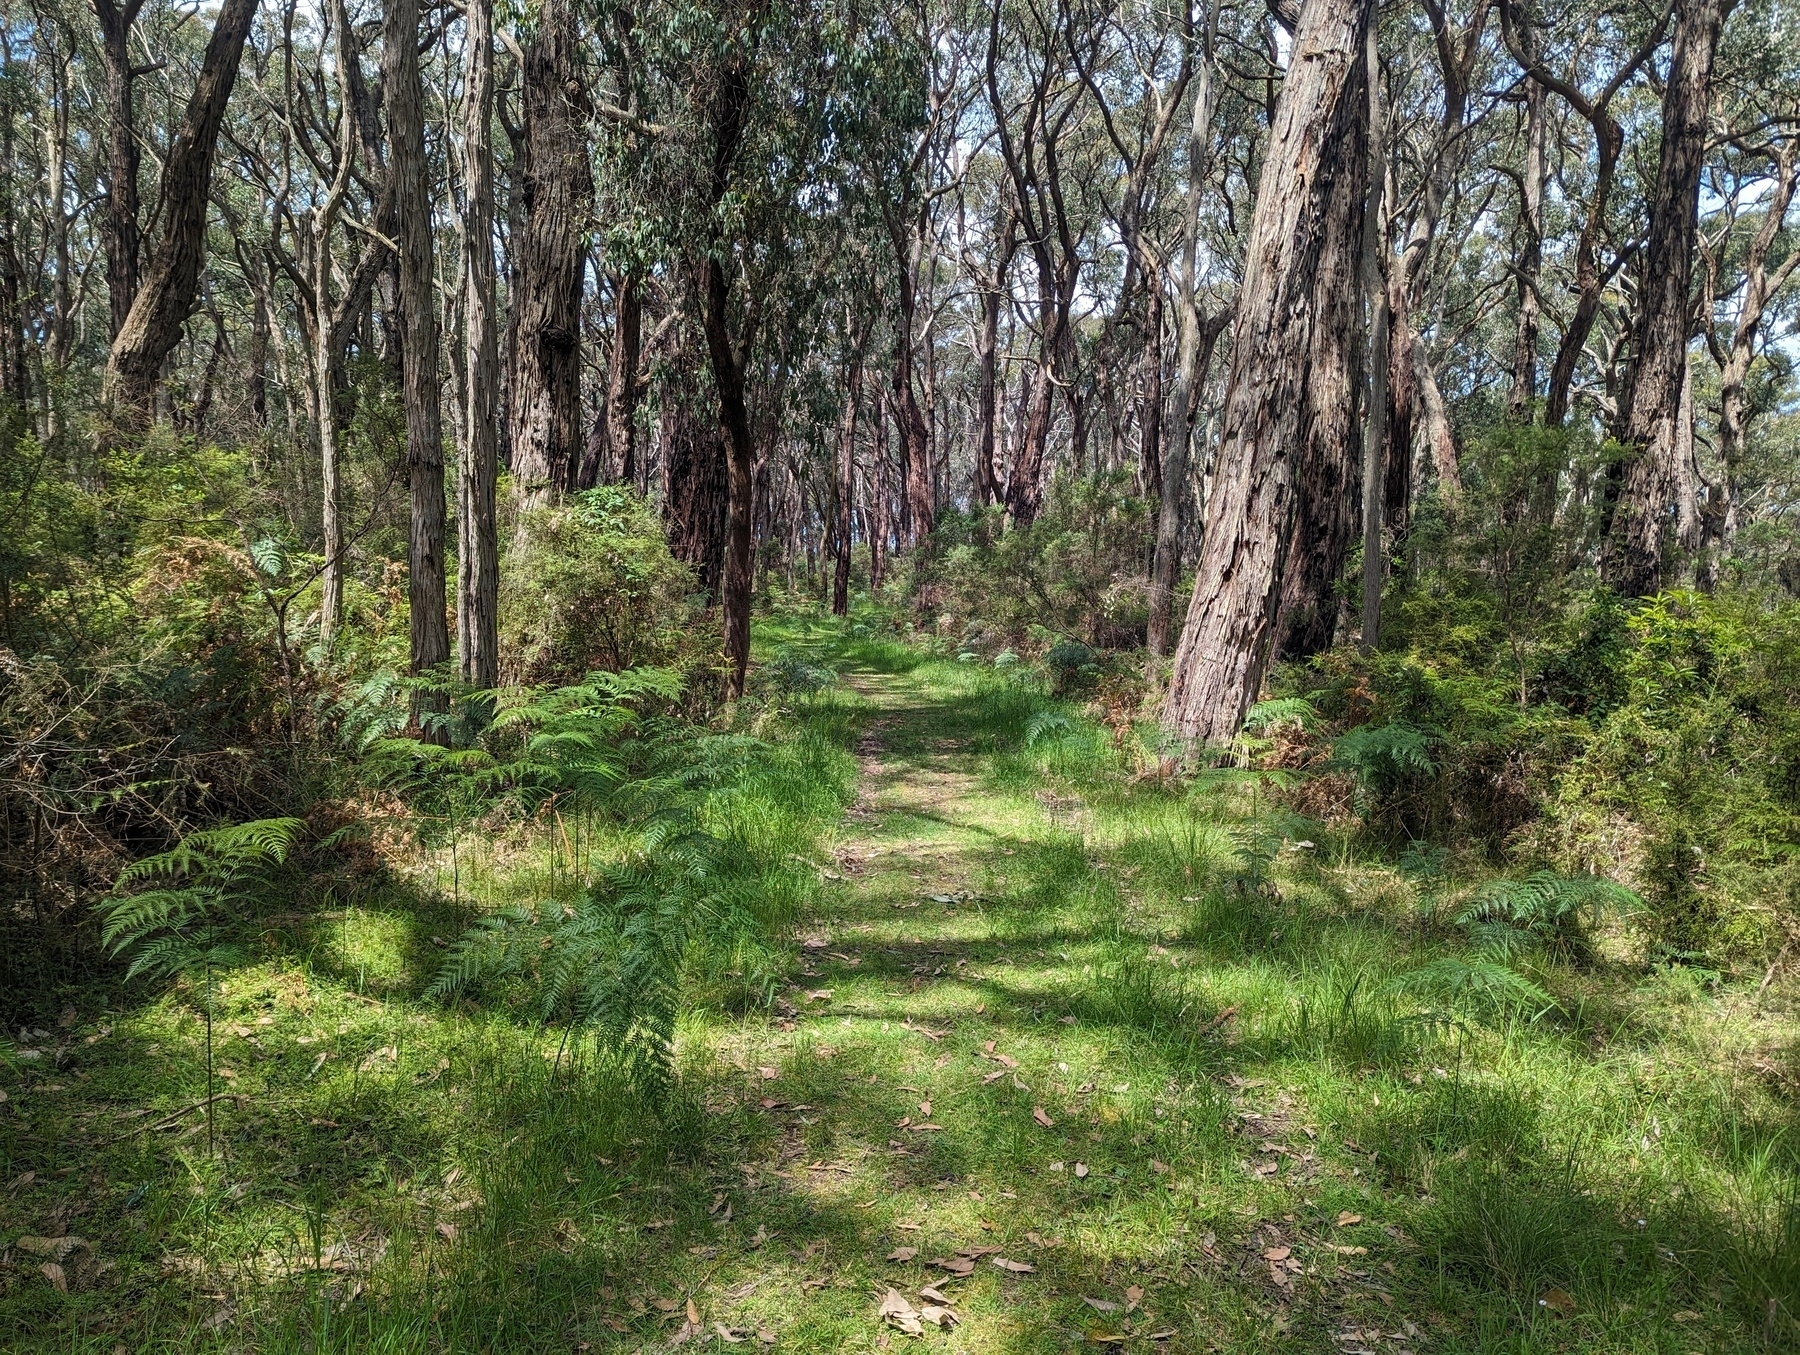 A path through a forest of eucalyptus trees